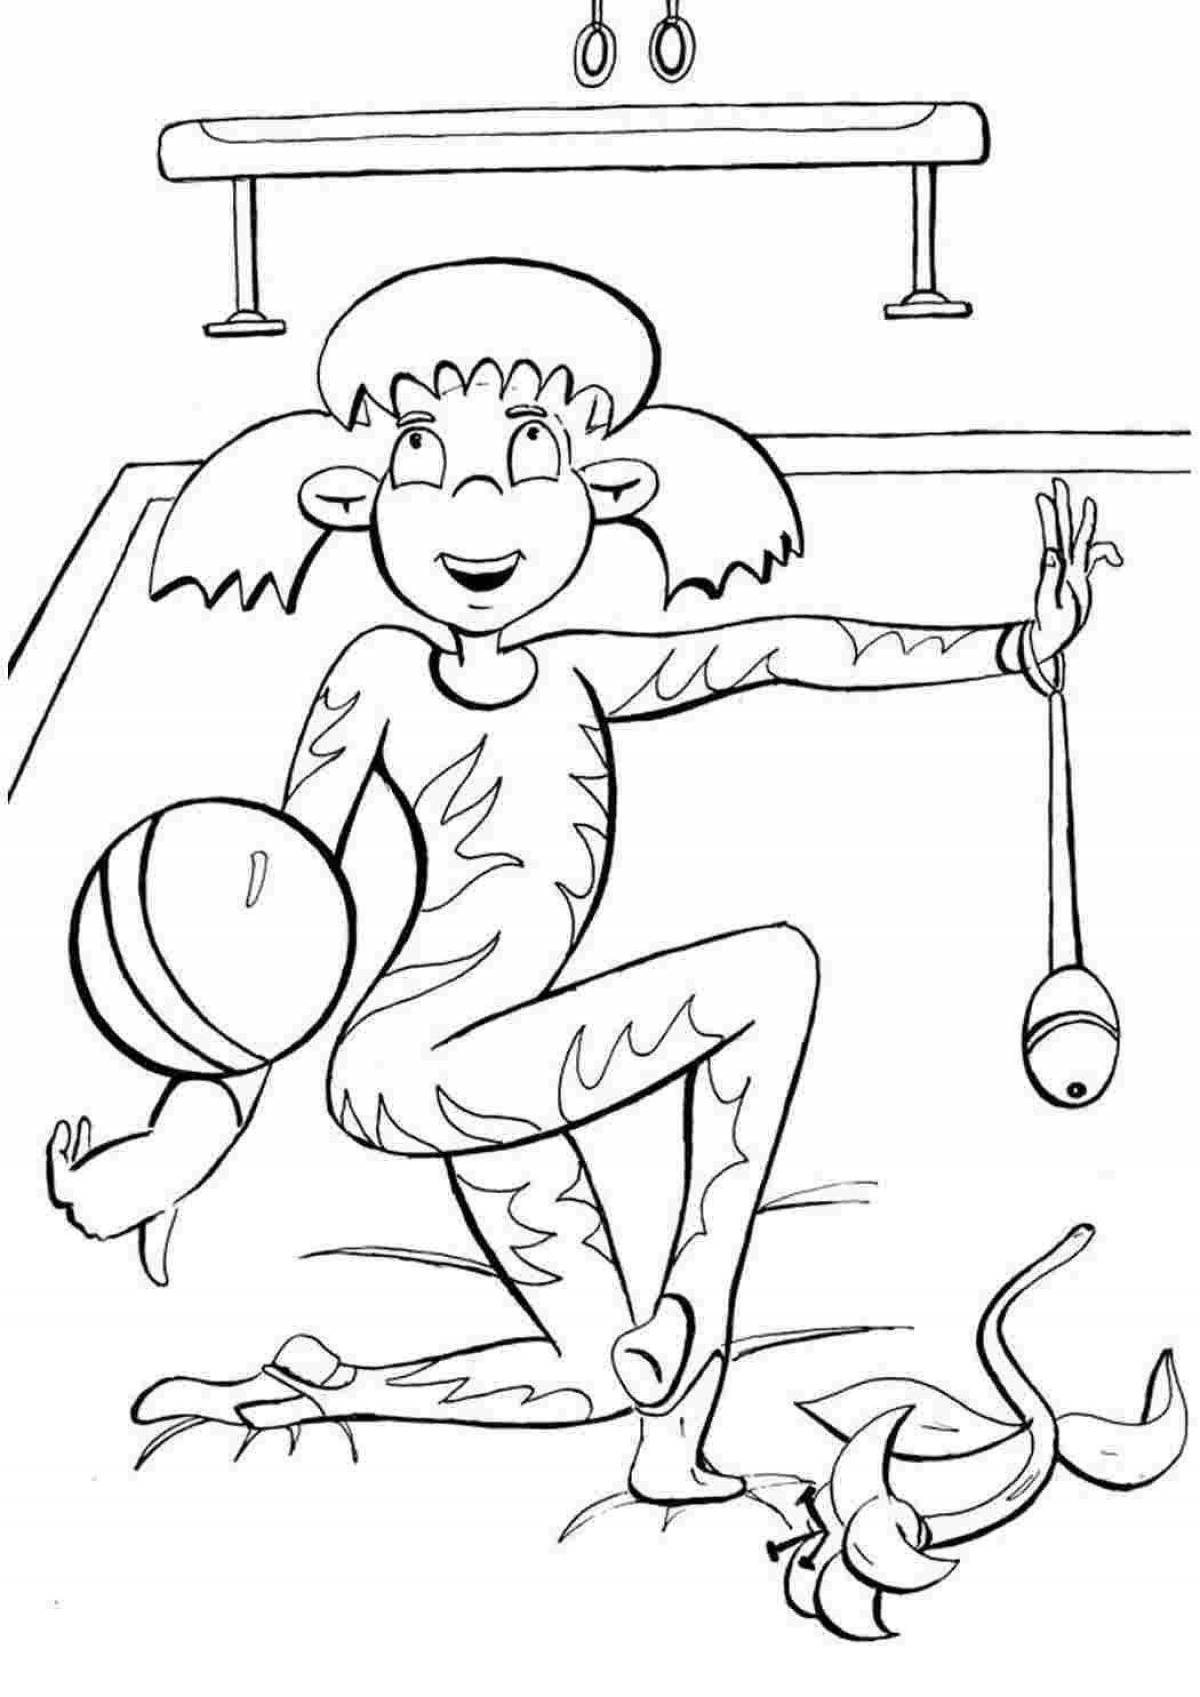 Live coloring for physical education and sports